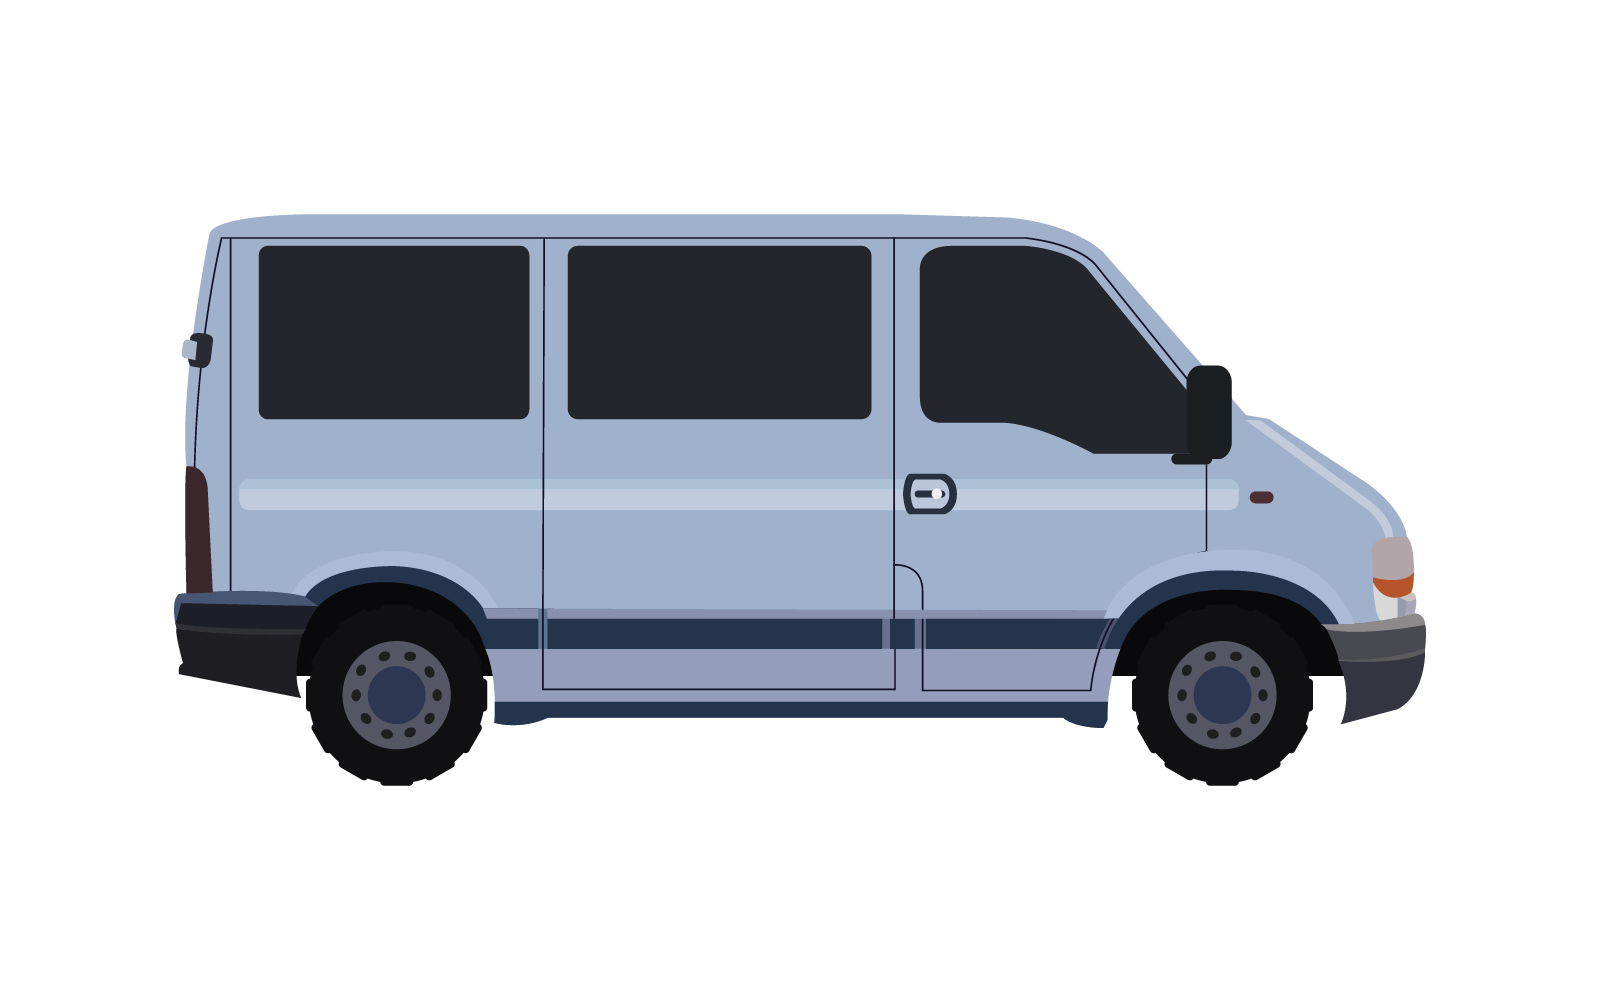 Van illustrated and colored in vector on a white background